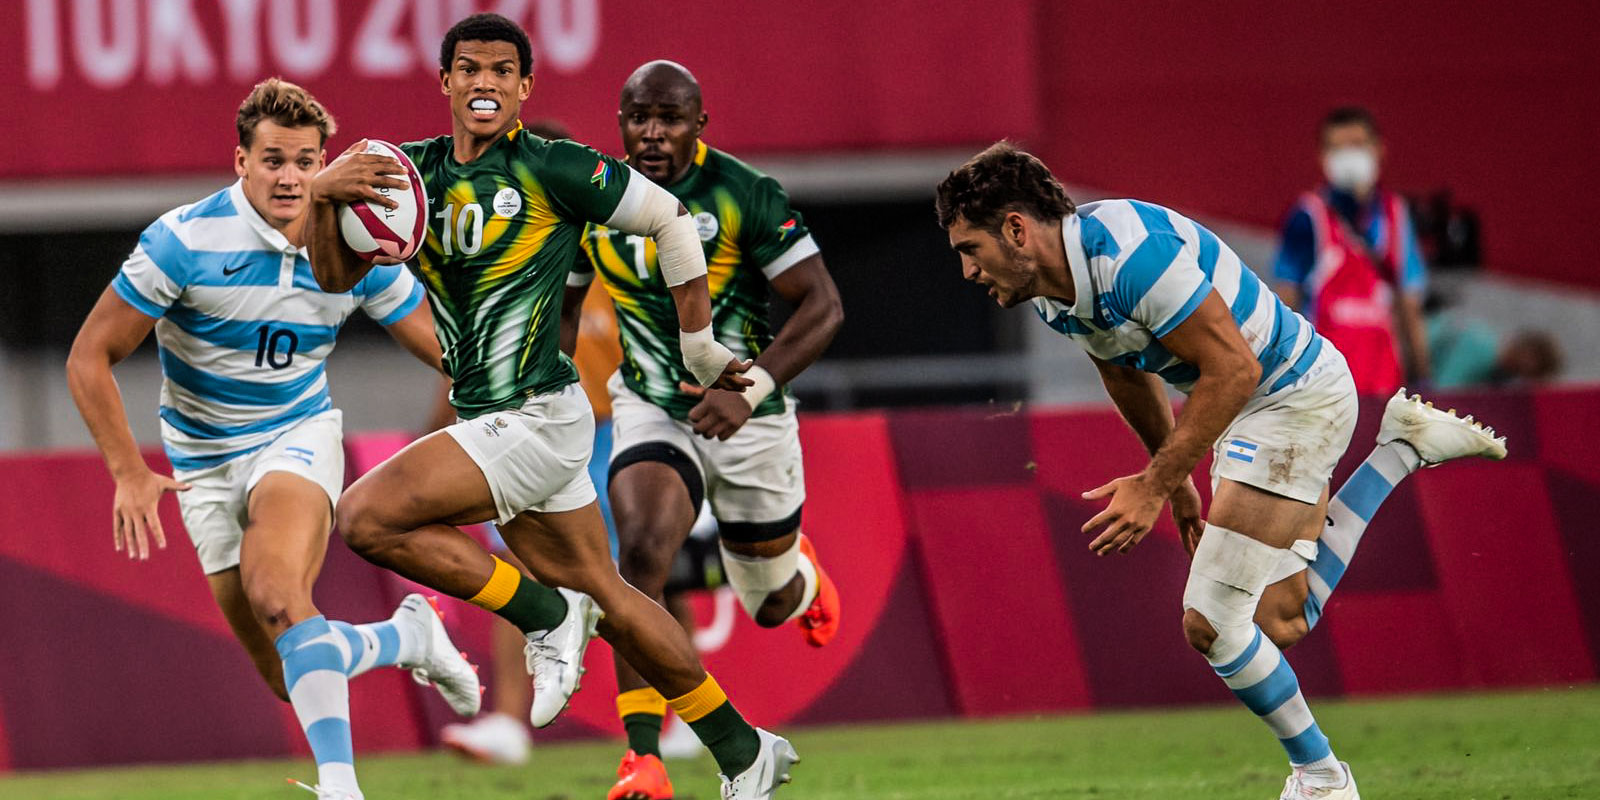 Kurt-Lee Arendse in action for the Blitzboks at the Olympic Games in Tokyo.